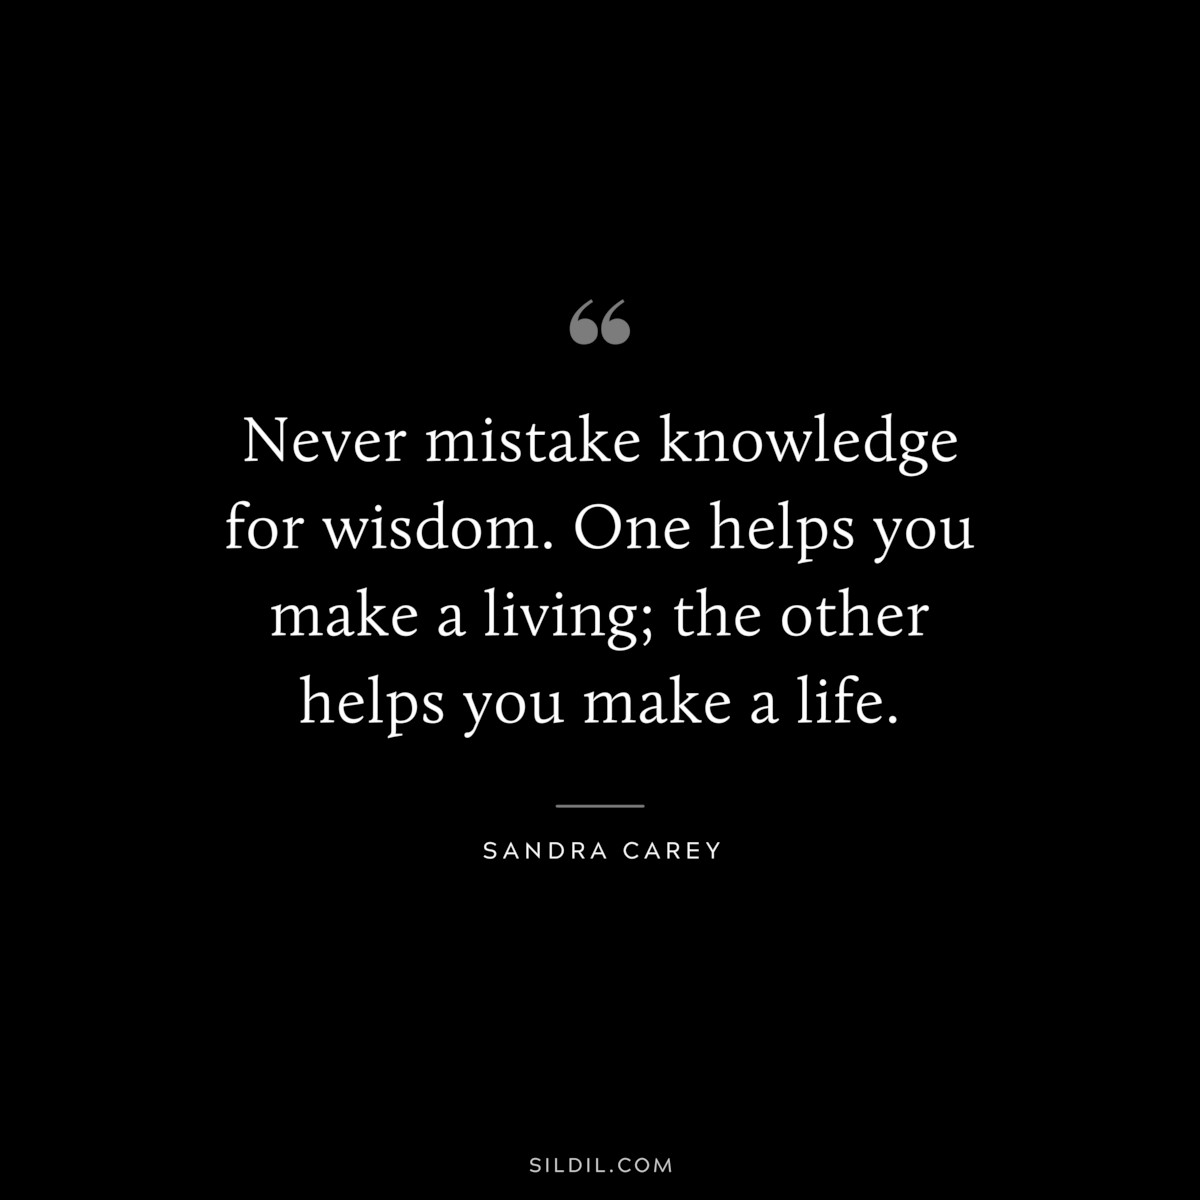 Never mistake knowledge for wisdom. One helps you make a living; the other helps you make a life. ― Sandra Carey